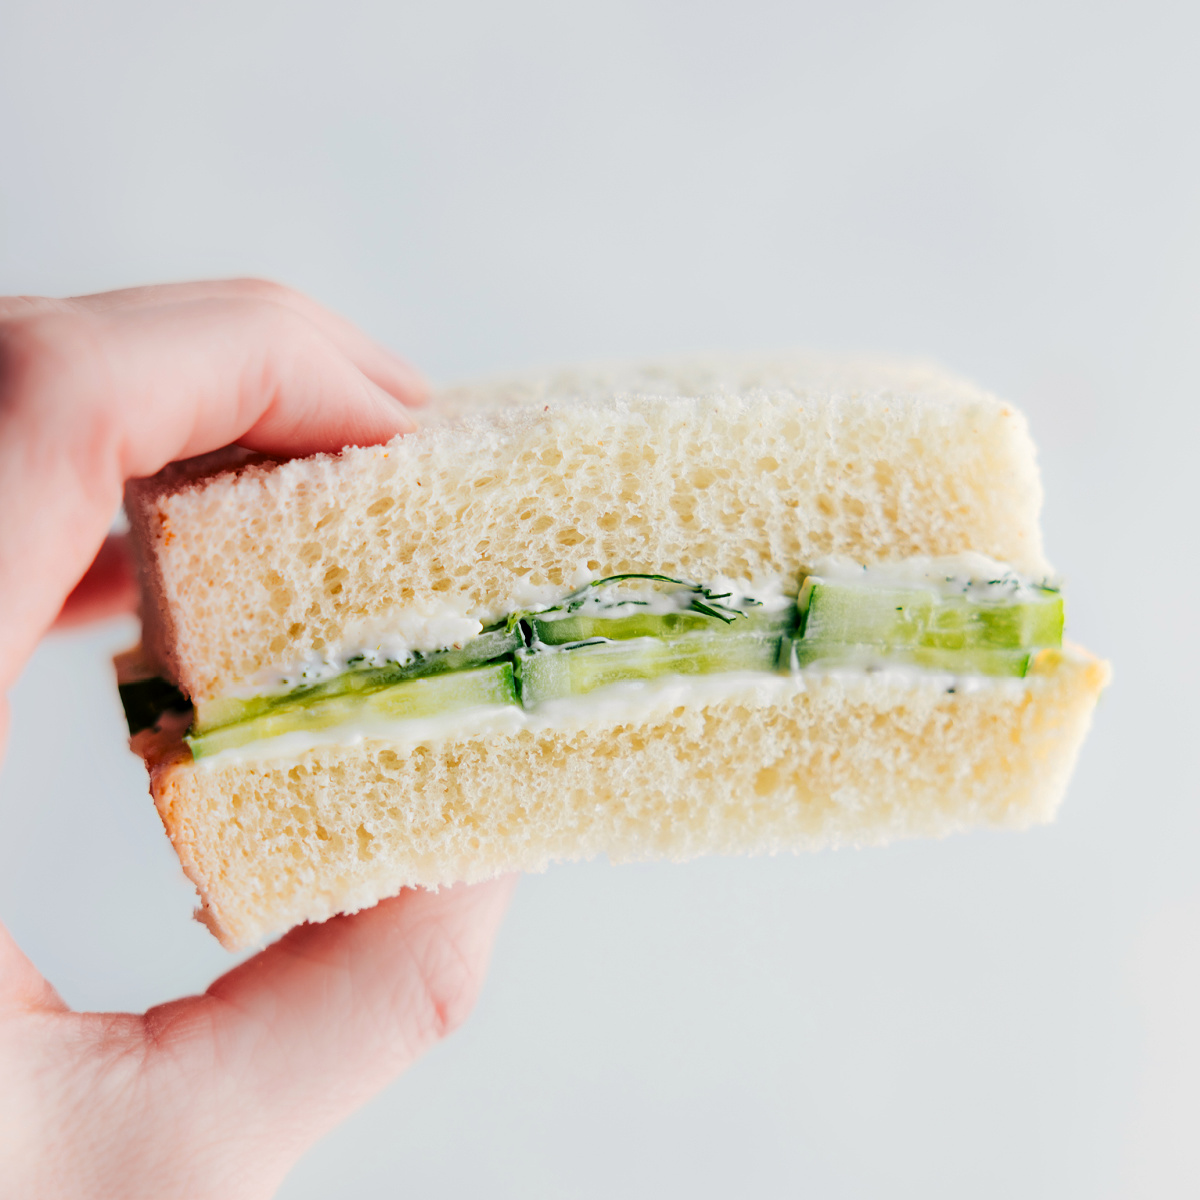 A cucumber sandwich being held up showing the yummy insides.